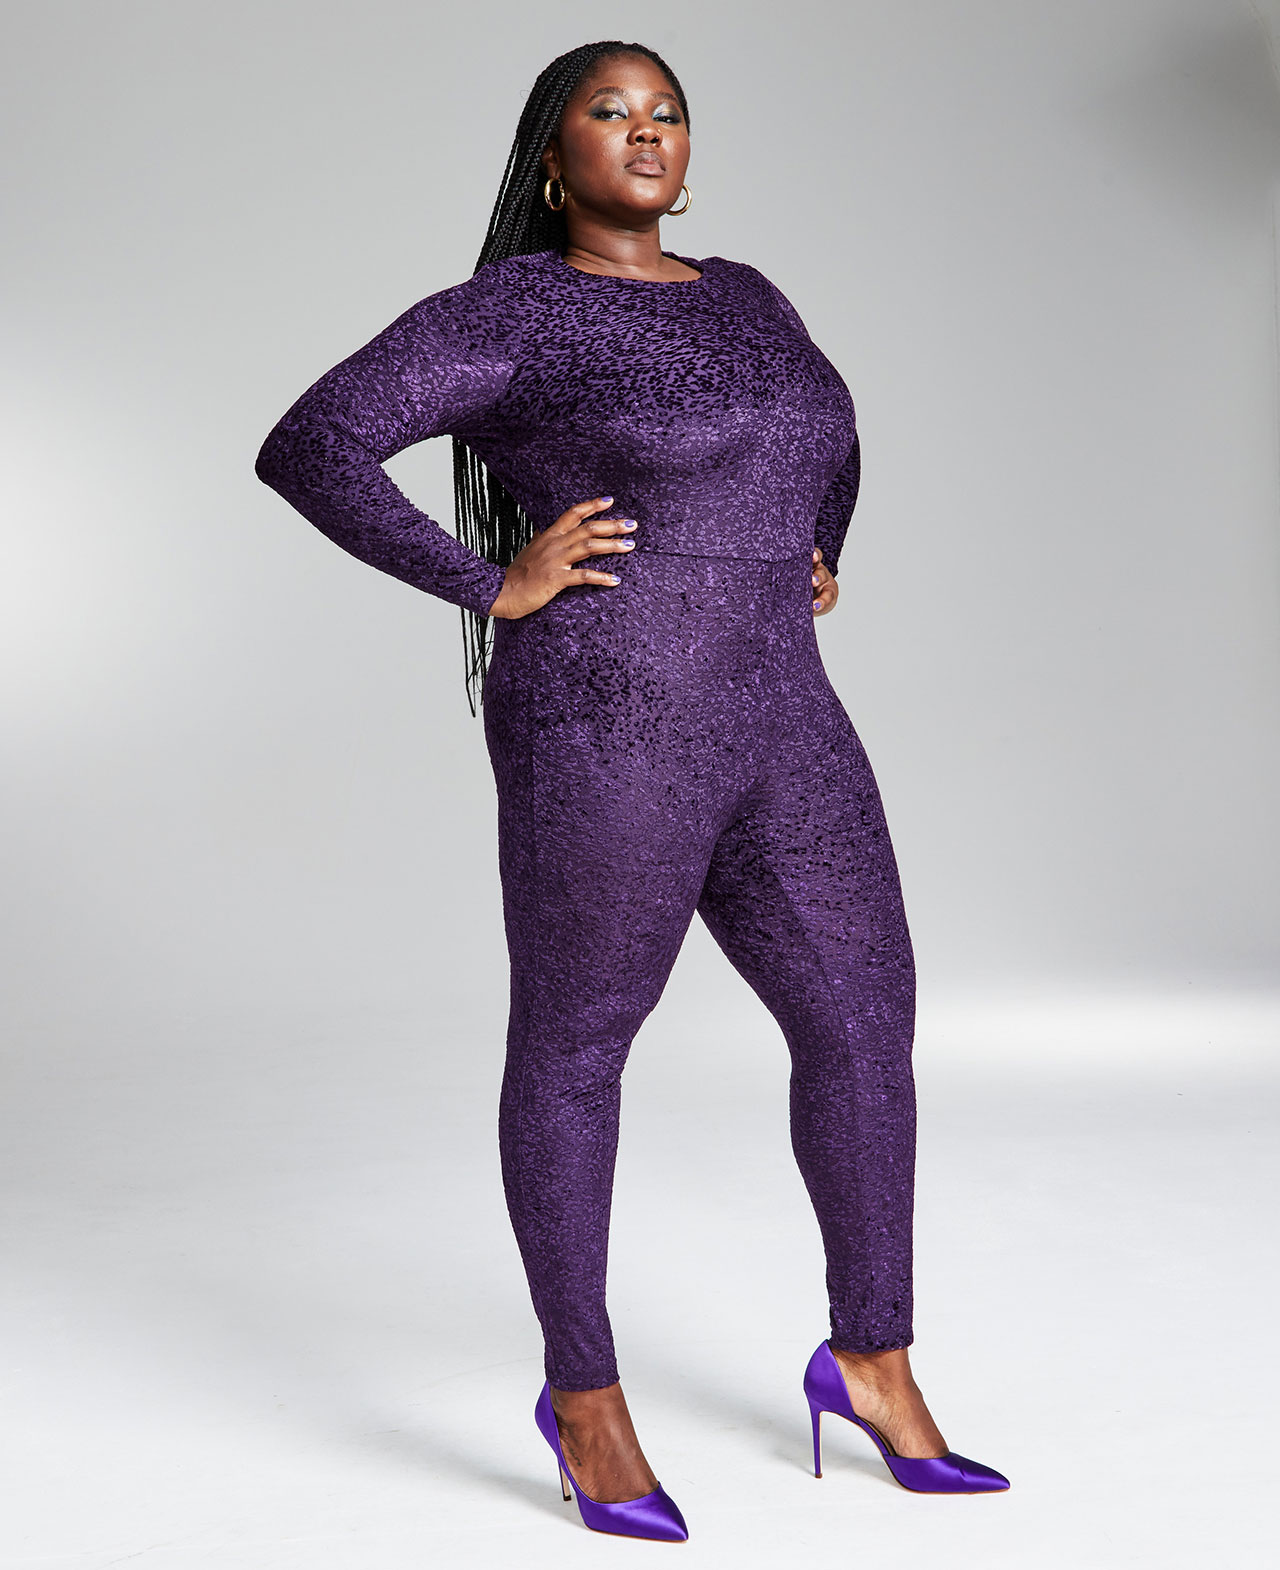 The Best Clothes for Plus Size Women at Macy's